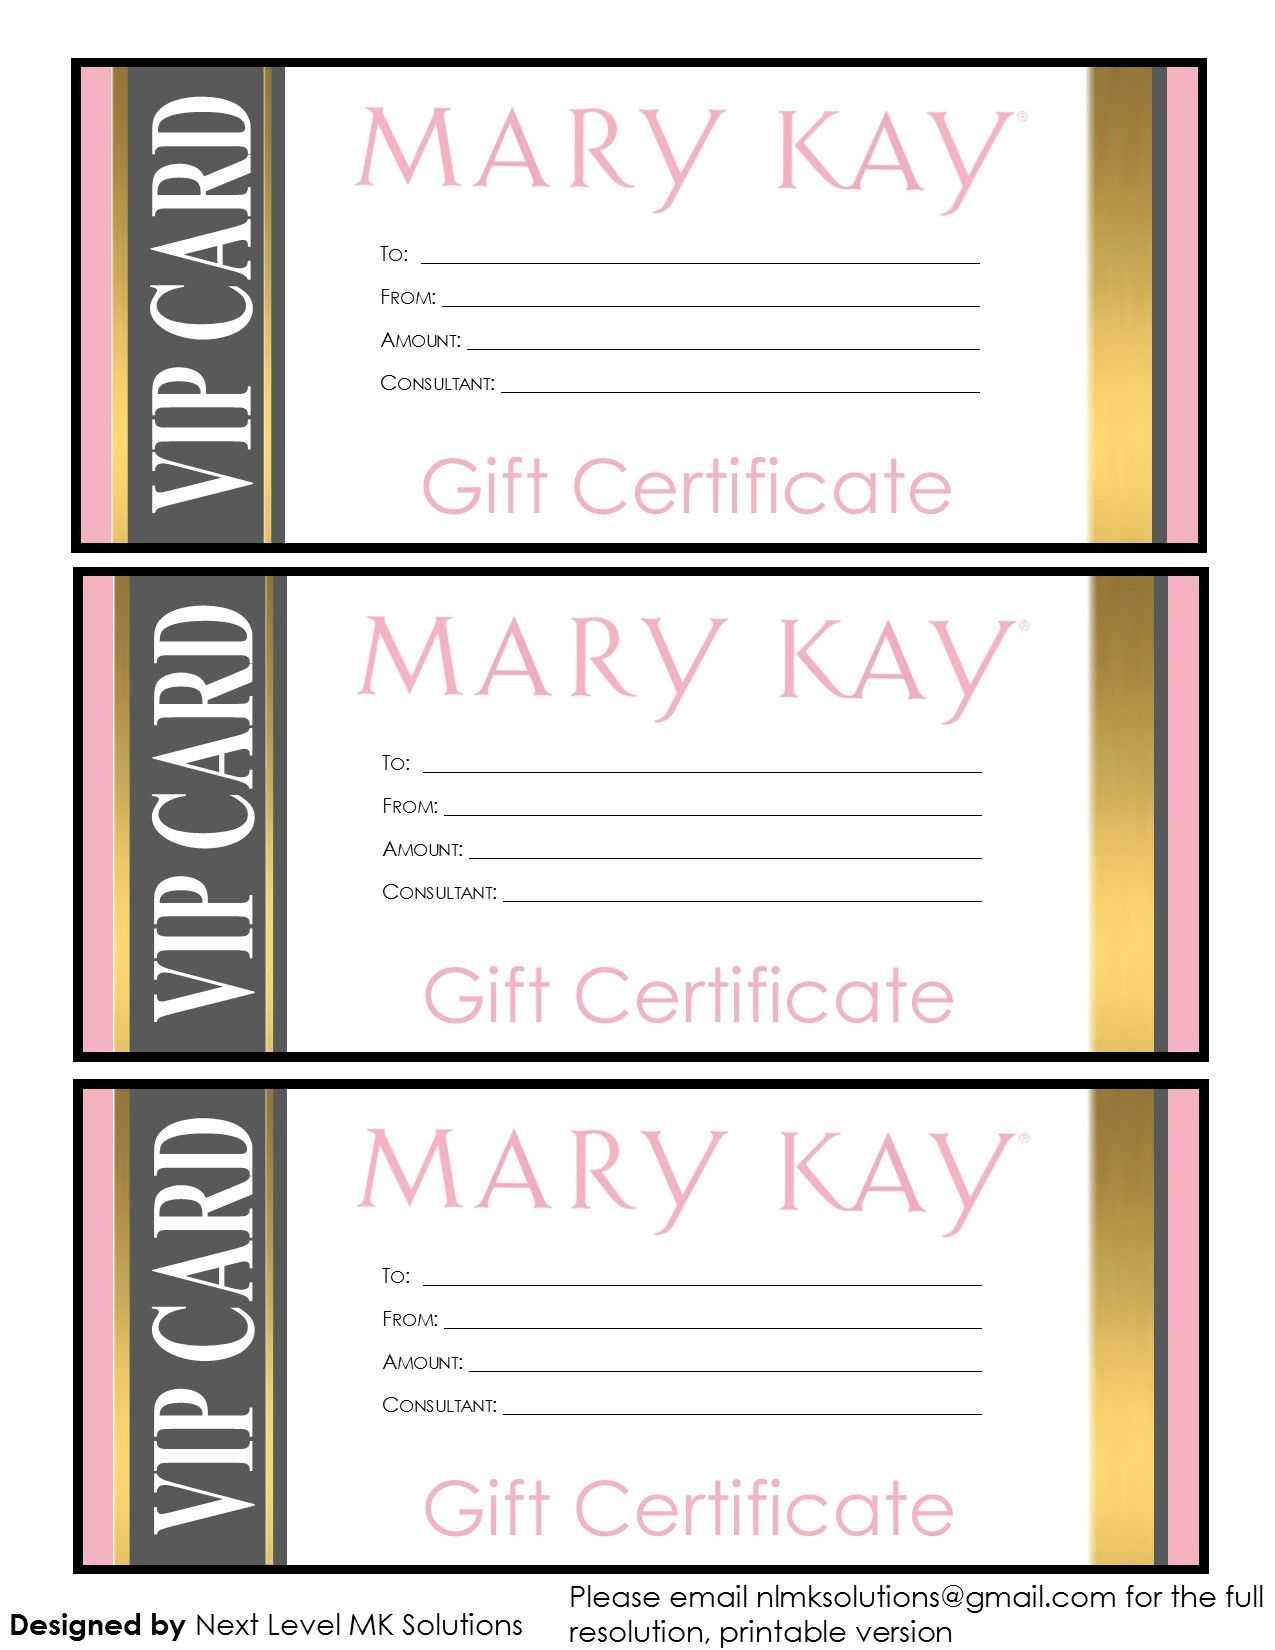 Mary Kay Gift Certificates – Please Email For The Full Pdf Throughout Mary Kay Gift Certificate Template